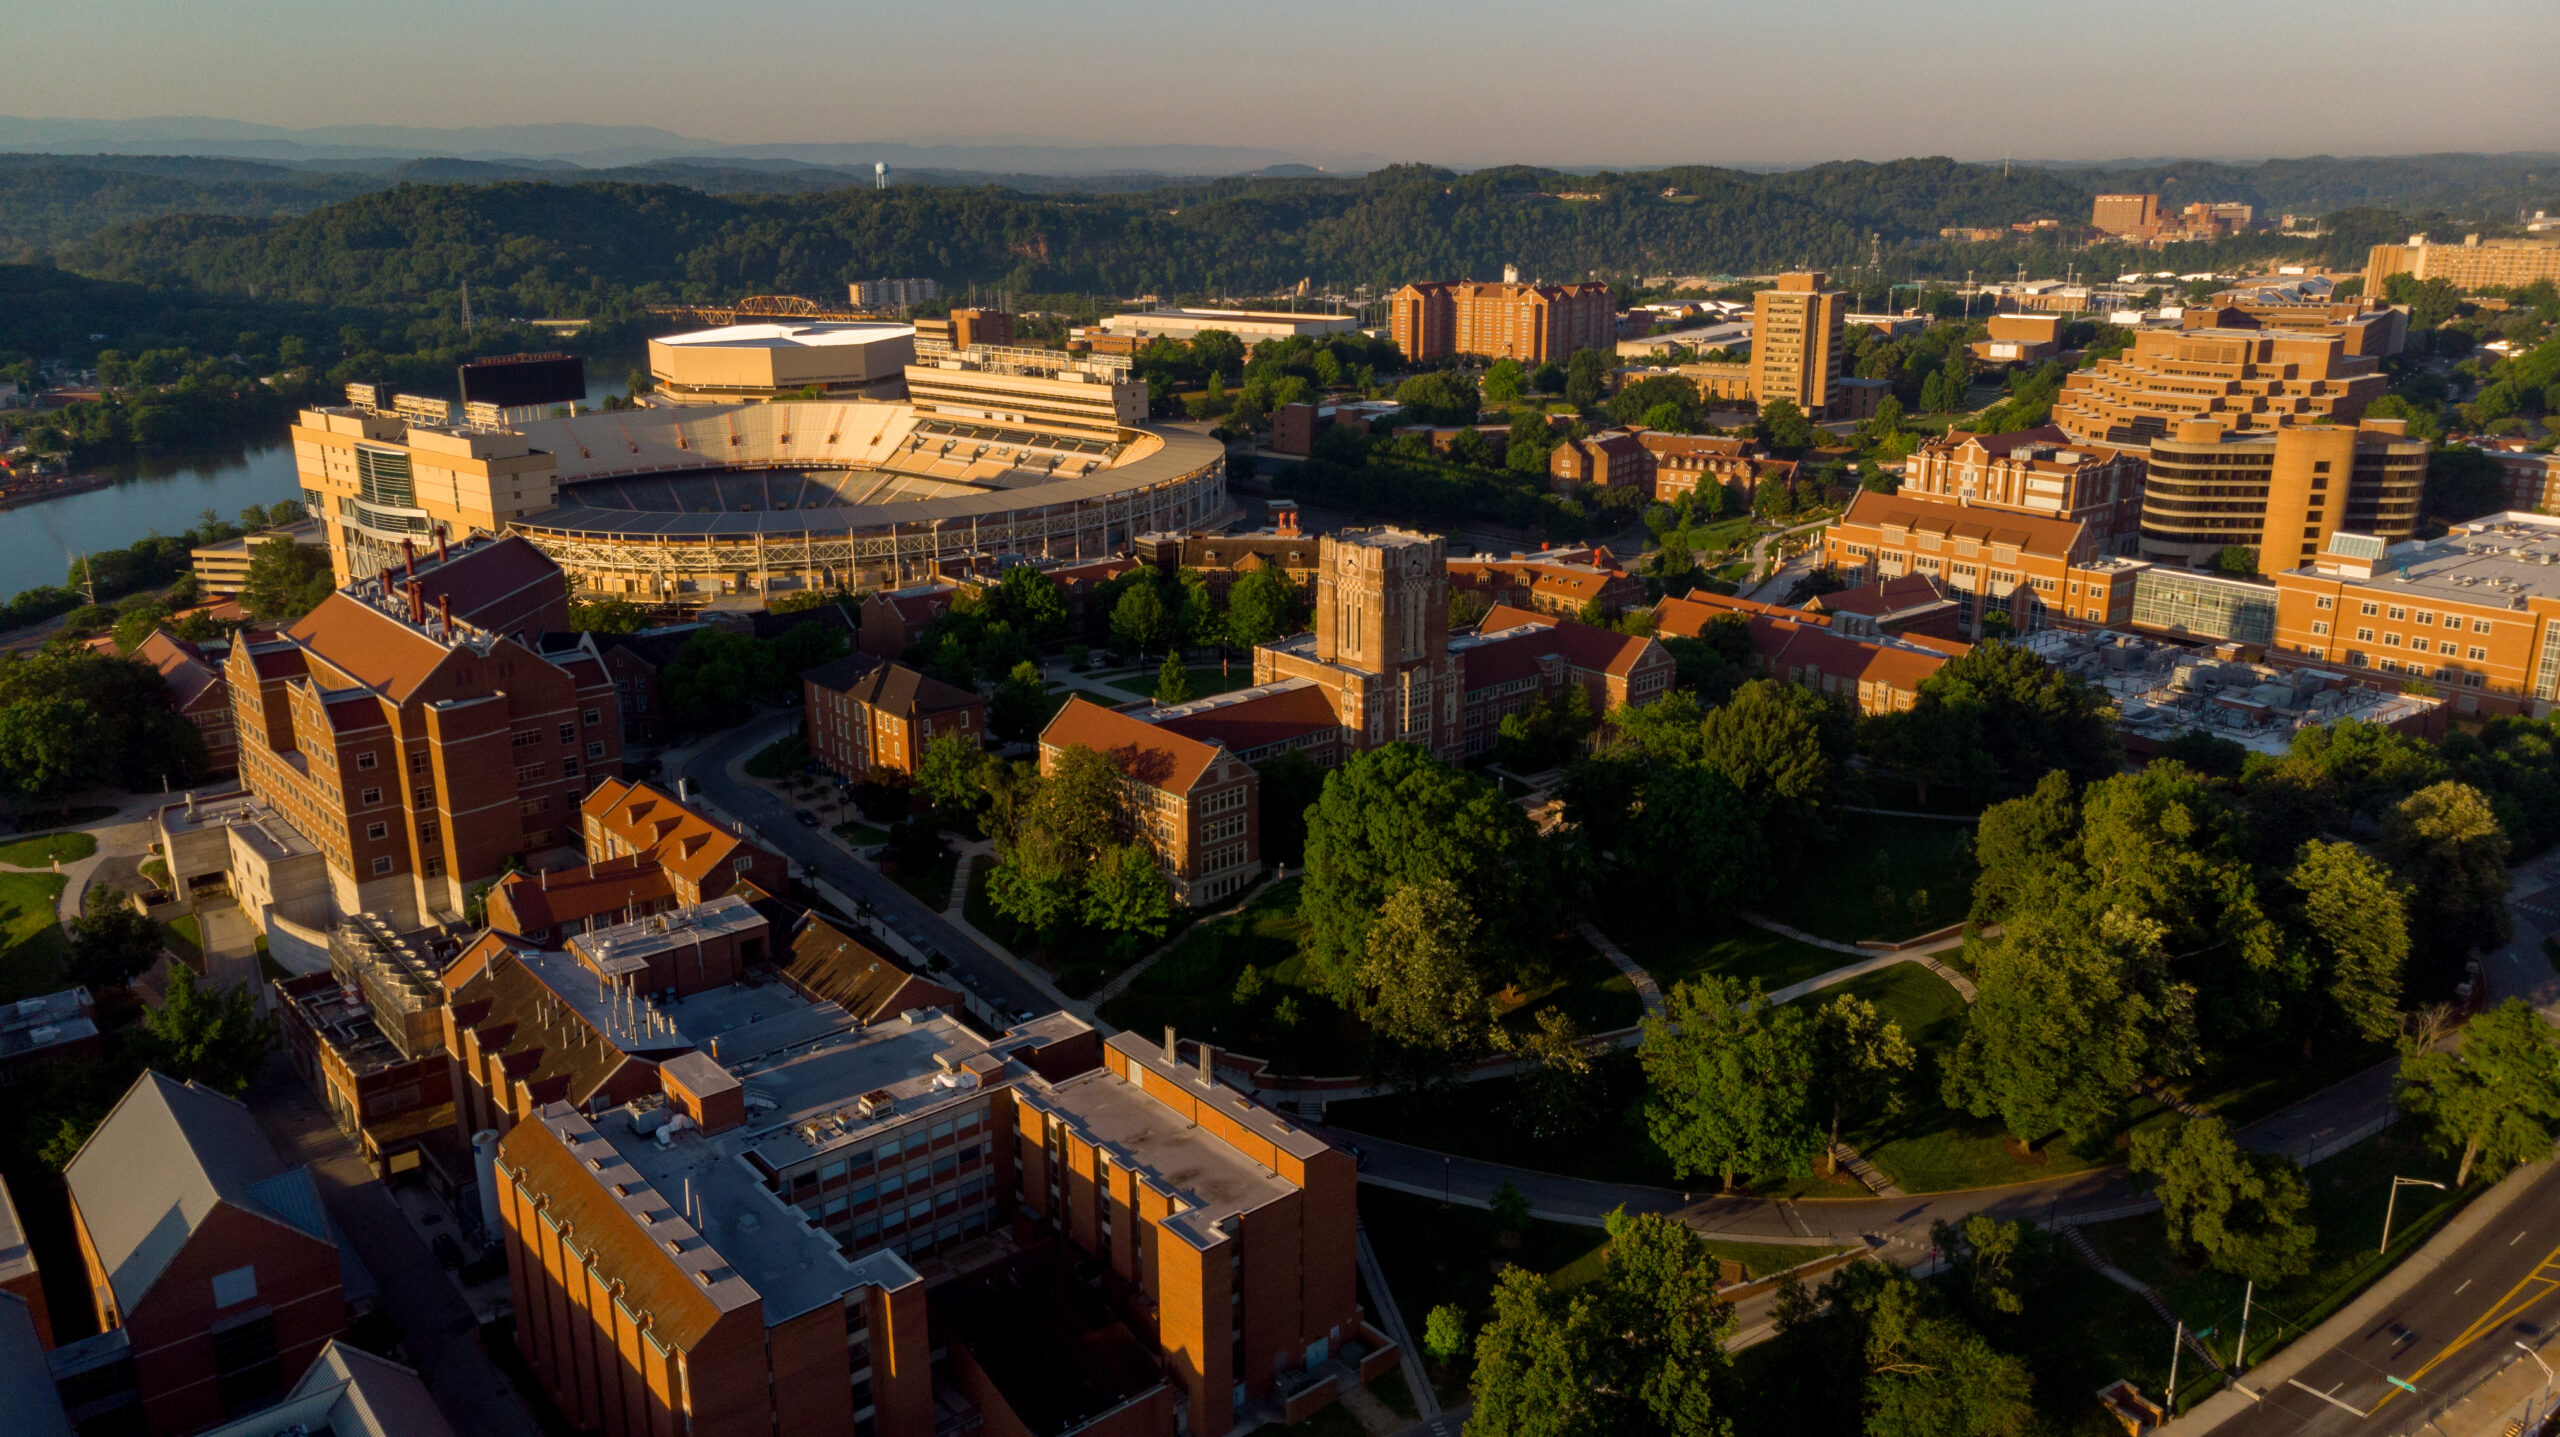 Tennessee University in Knoxville with admin building and stadium